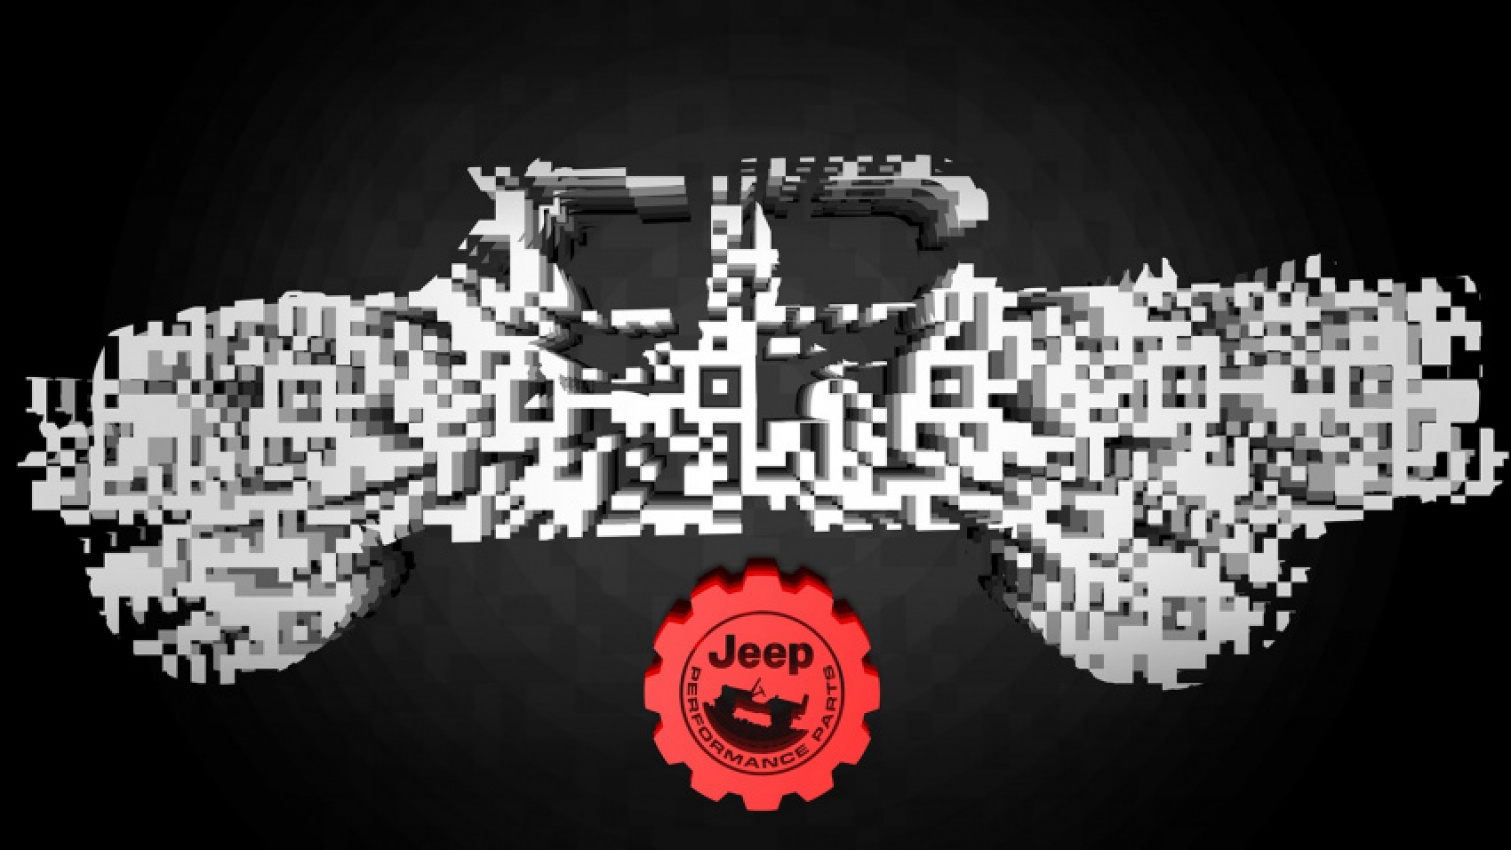 aftermarket, autos, cars, jeep, aftermarket, green, hybrid, jeep grand cherokee, off-road vehicles, truck, jeep grand cherokee 4xe and jeep parts lead easter safari teasers